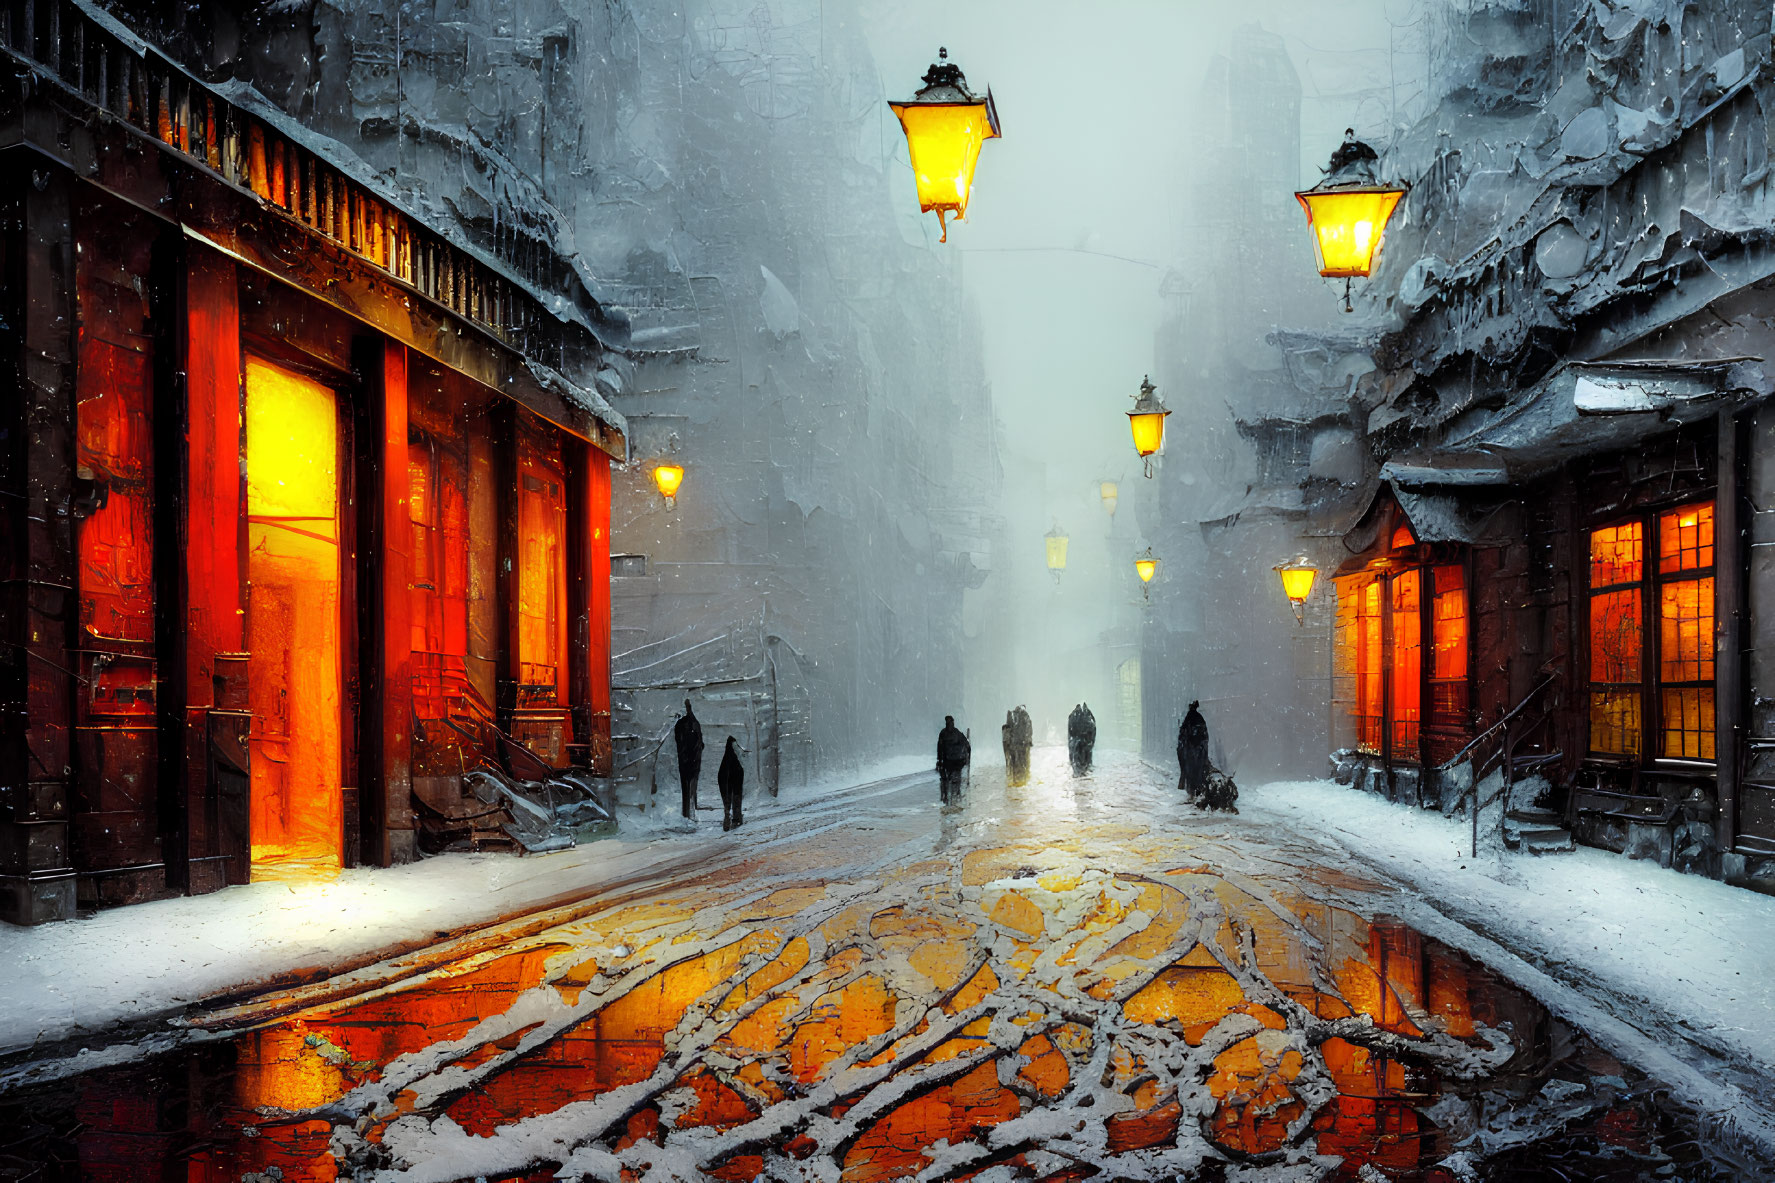 Snowy Street Scene with Golden-Lit Storefronts and Silhouetted Figures